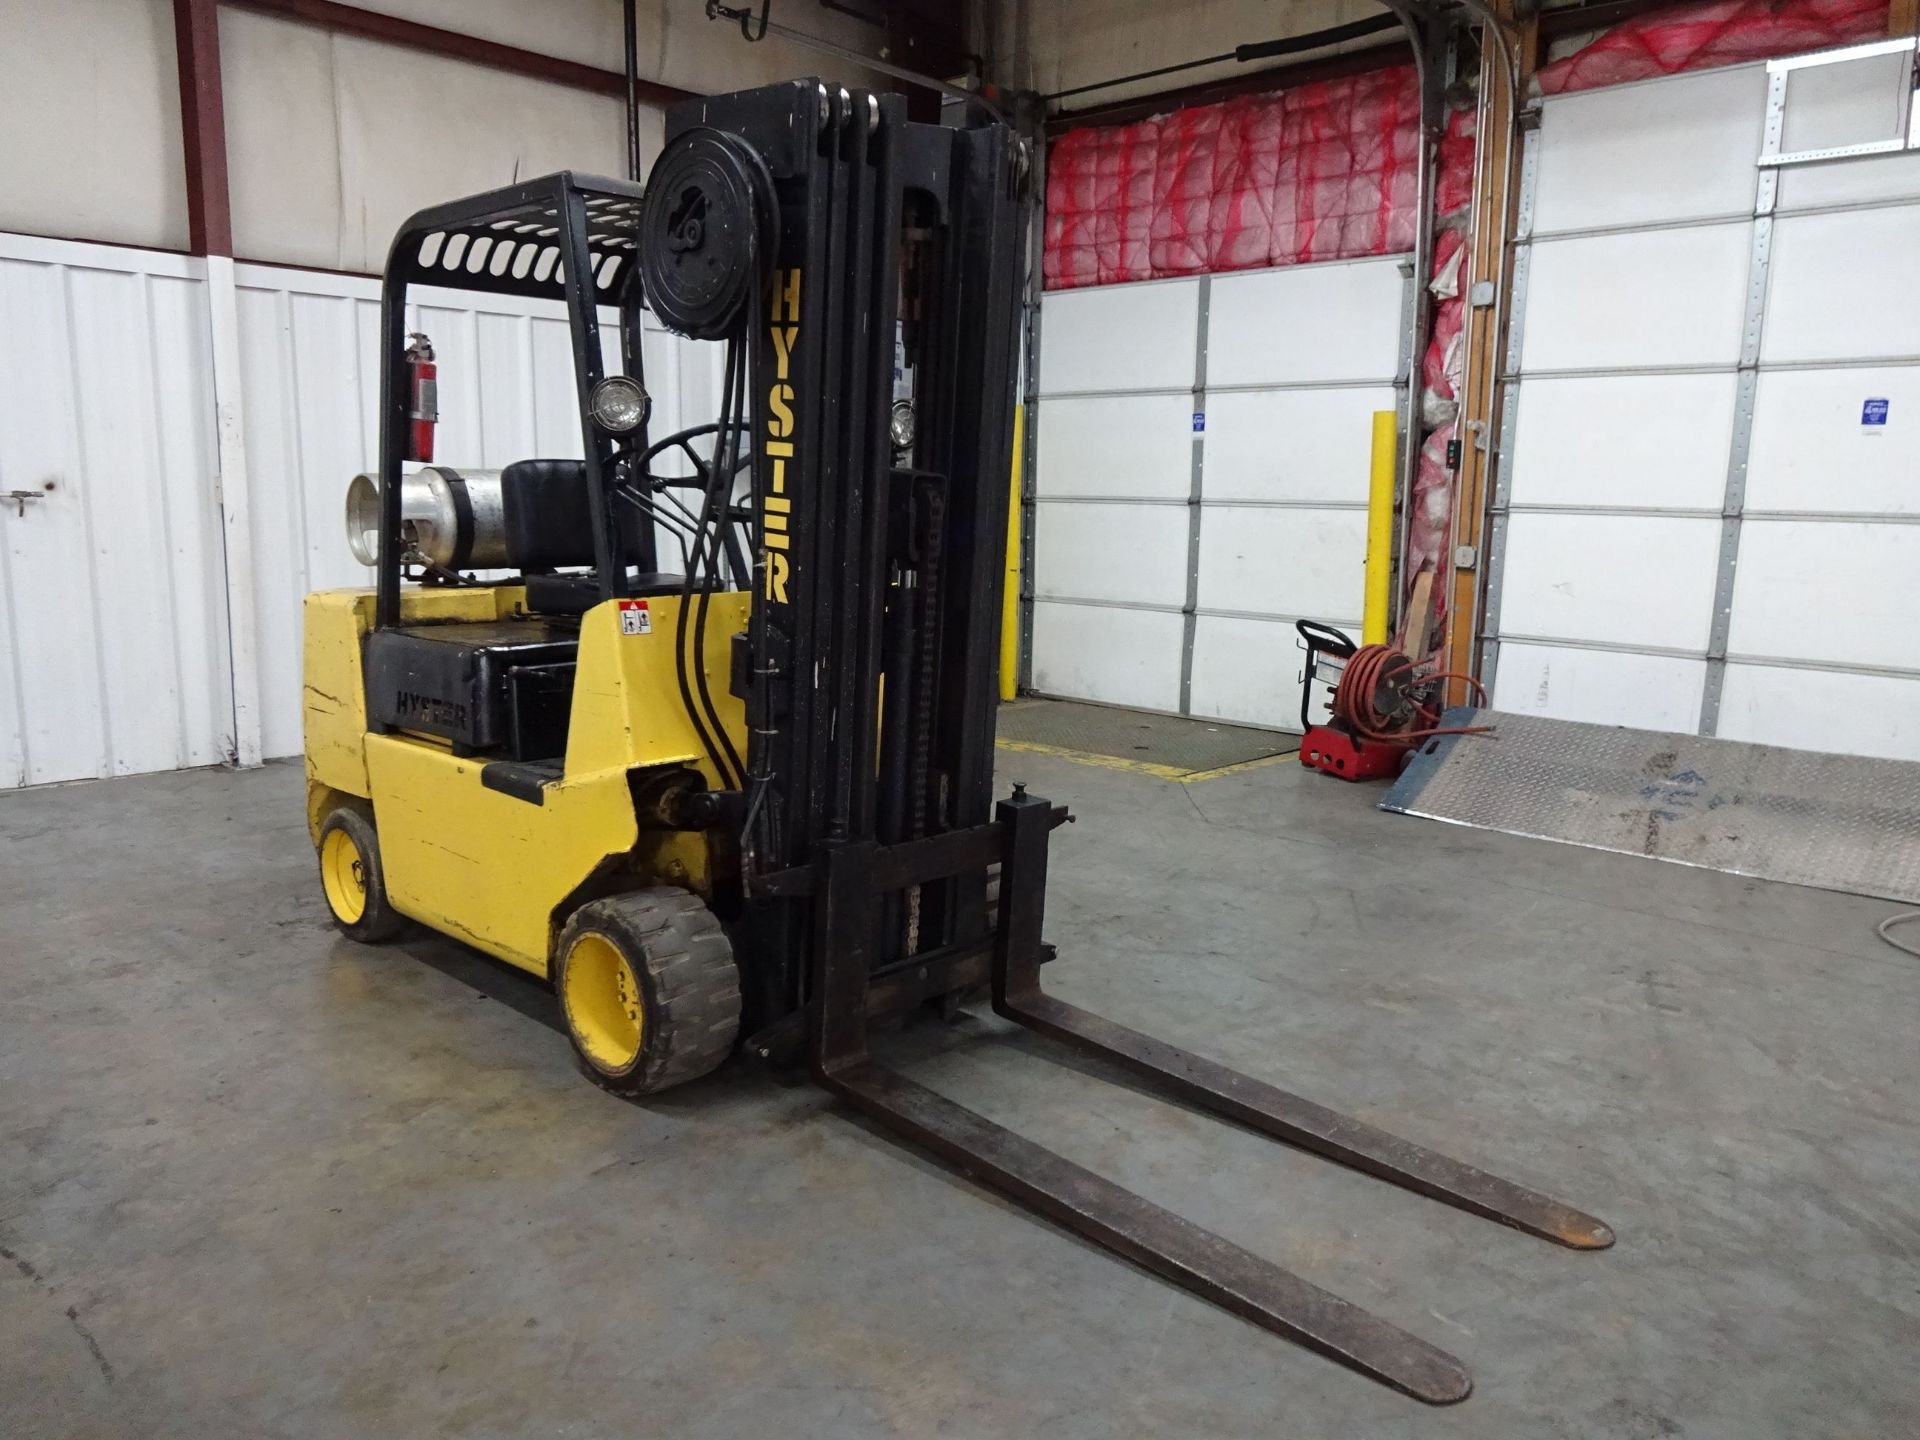 6,000 LB. HYSTER MODEL S60XL SOLID TIRE LP GAS LIFT TRUCK; S/N A187V15701K (1,179 HOURS), 4-STAGE - Image 3 of 11